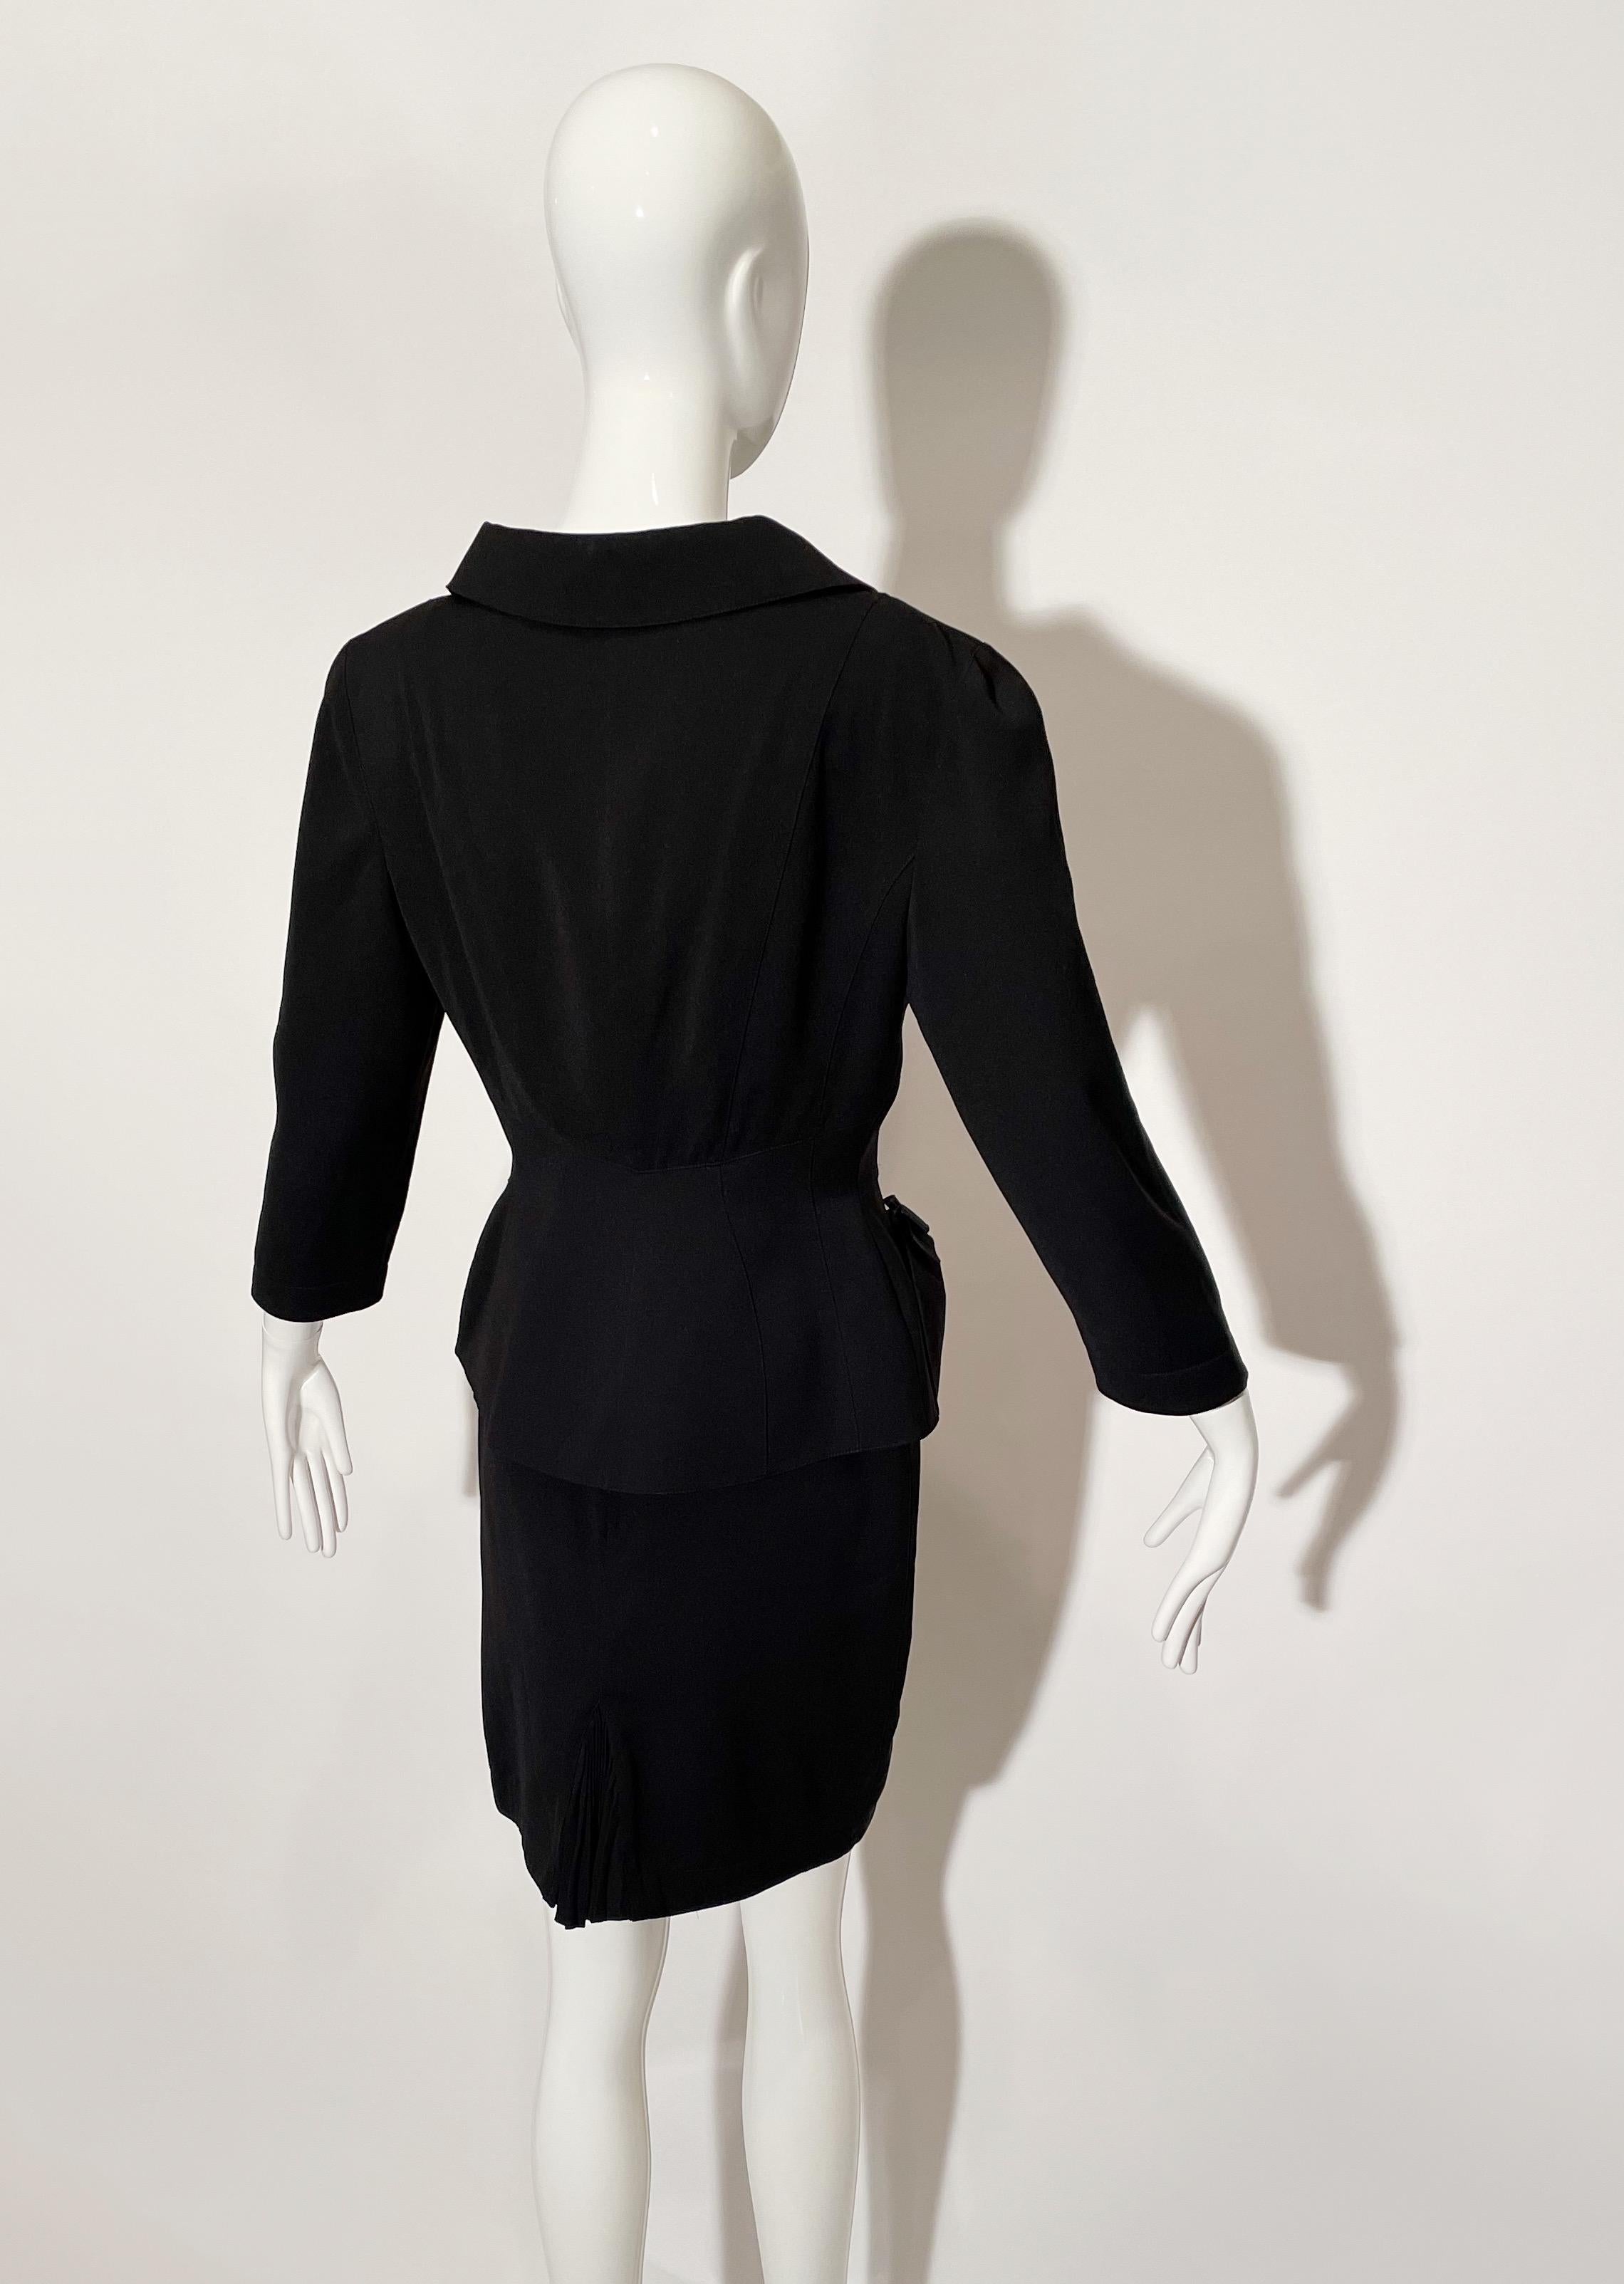 Thierry Mugler Black Bow Skirt Suit  For Sale 1